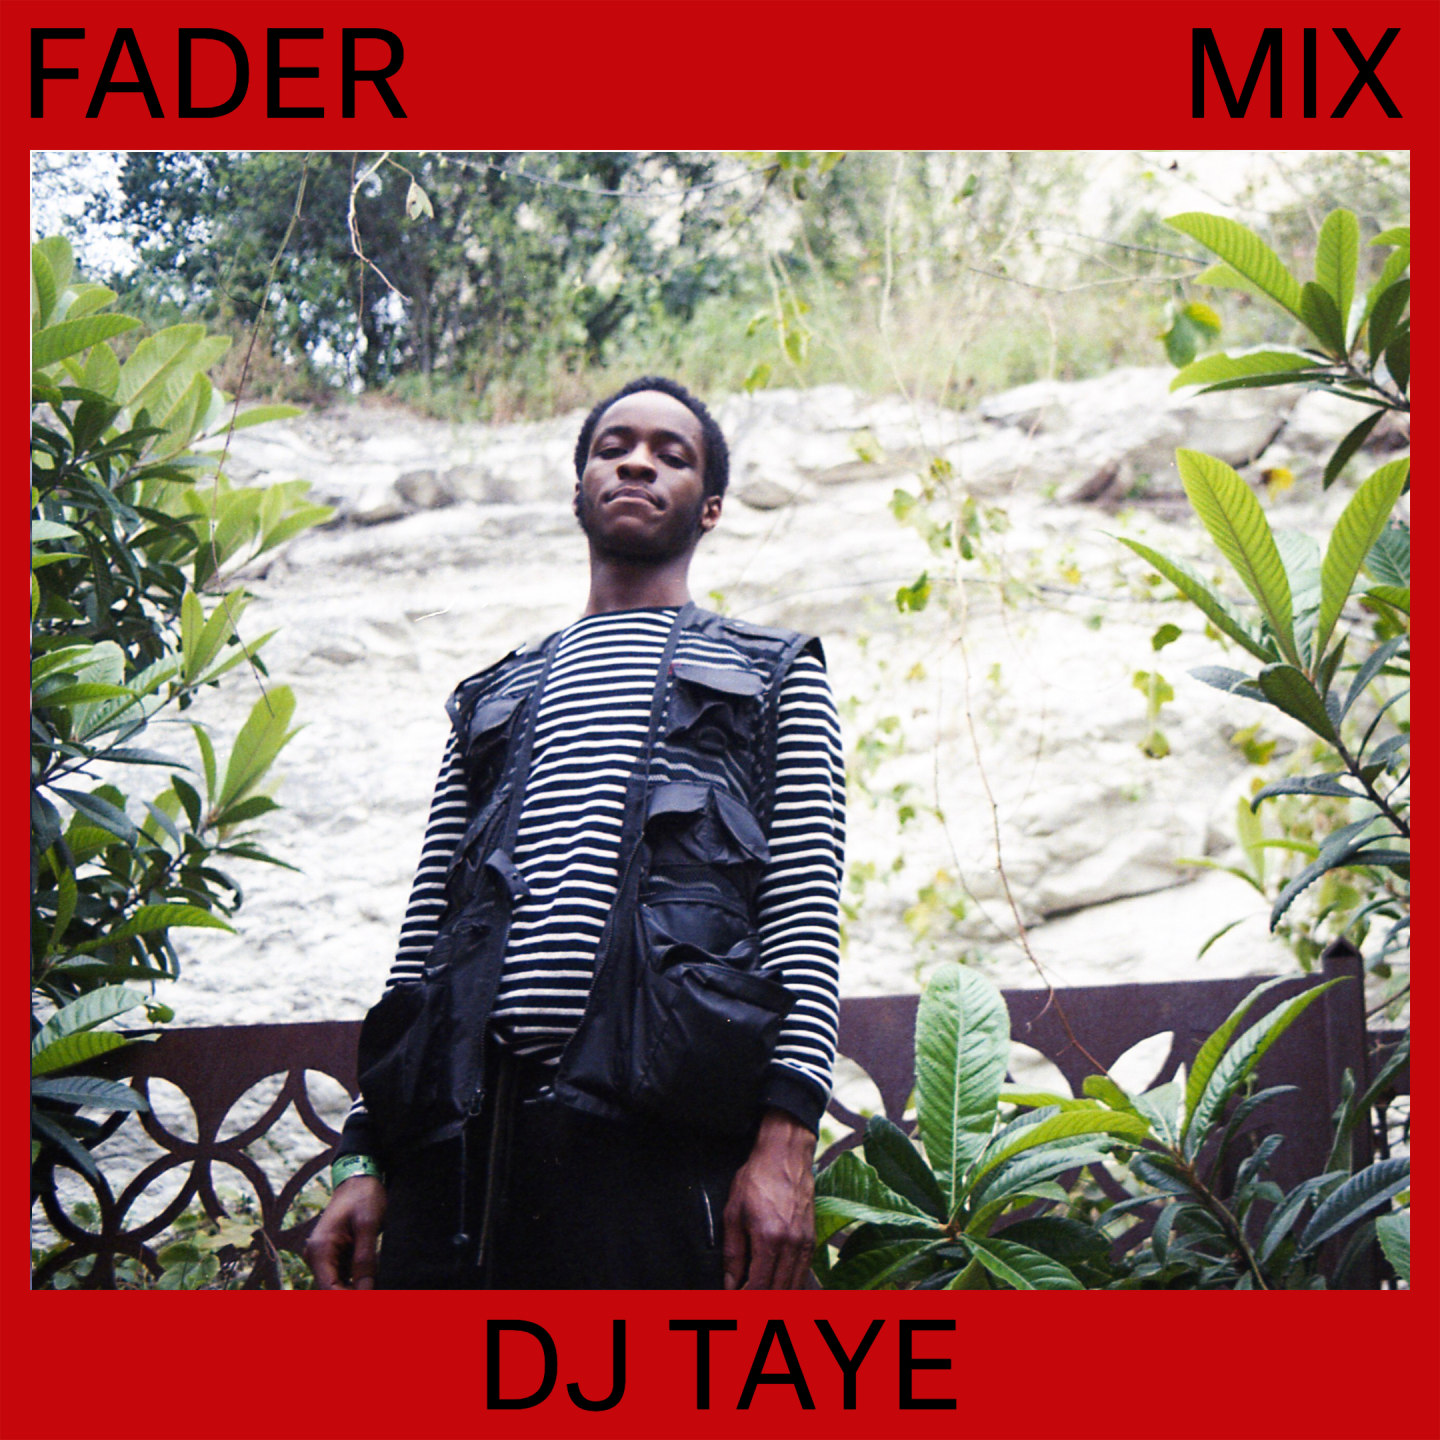 Listen to a new FADER Mix by DJ Taye